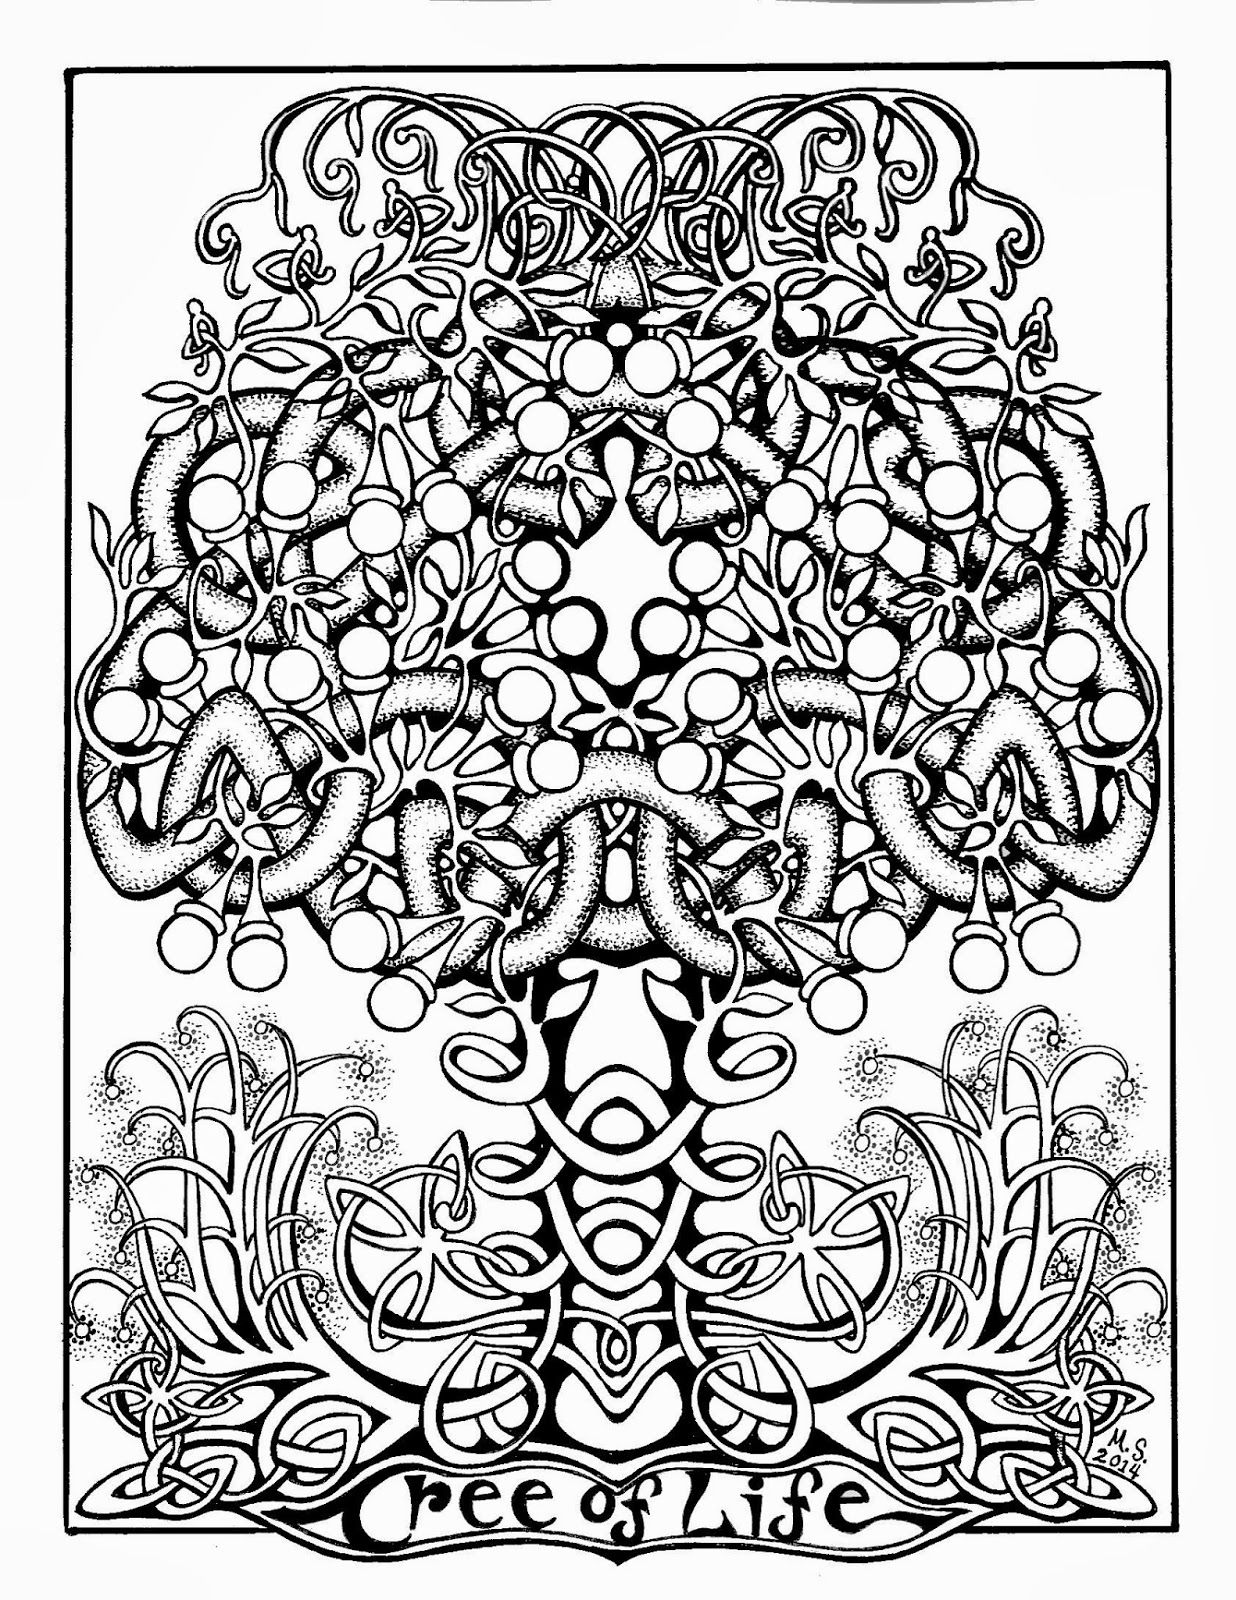 Butterfly Tree Coloring Page | Coloring Pages For All Ages